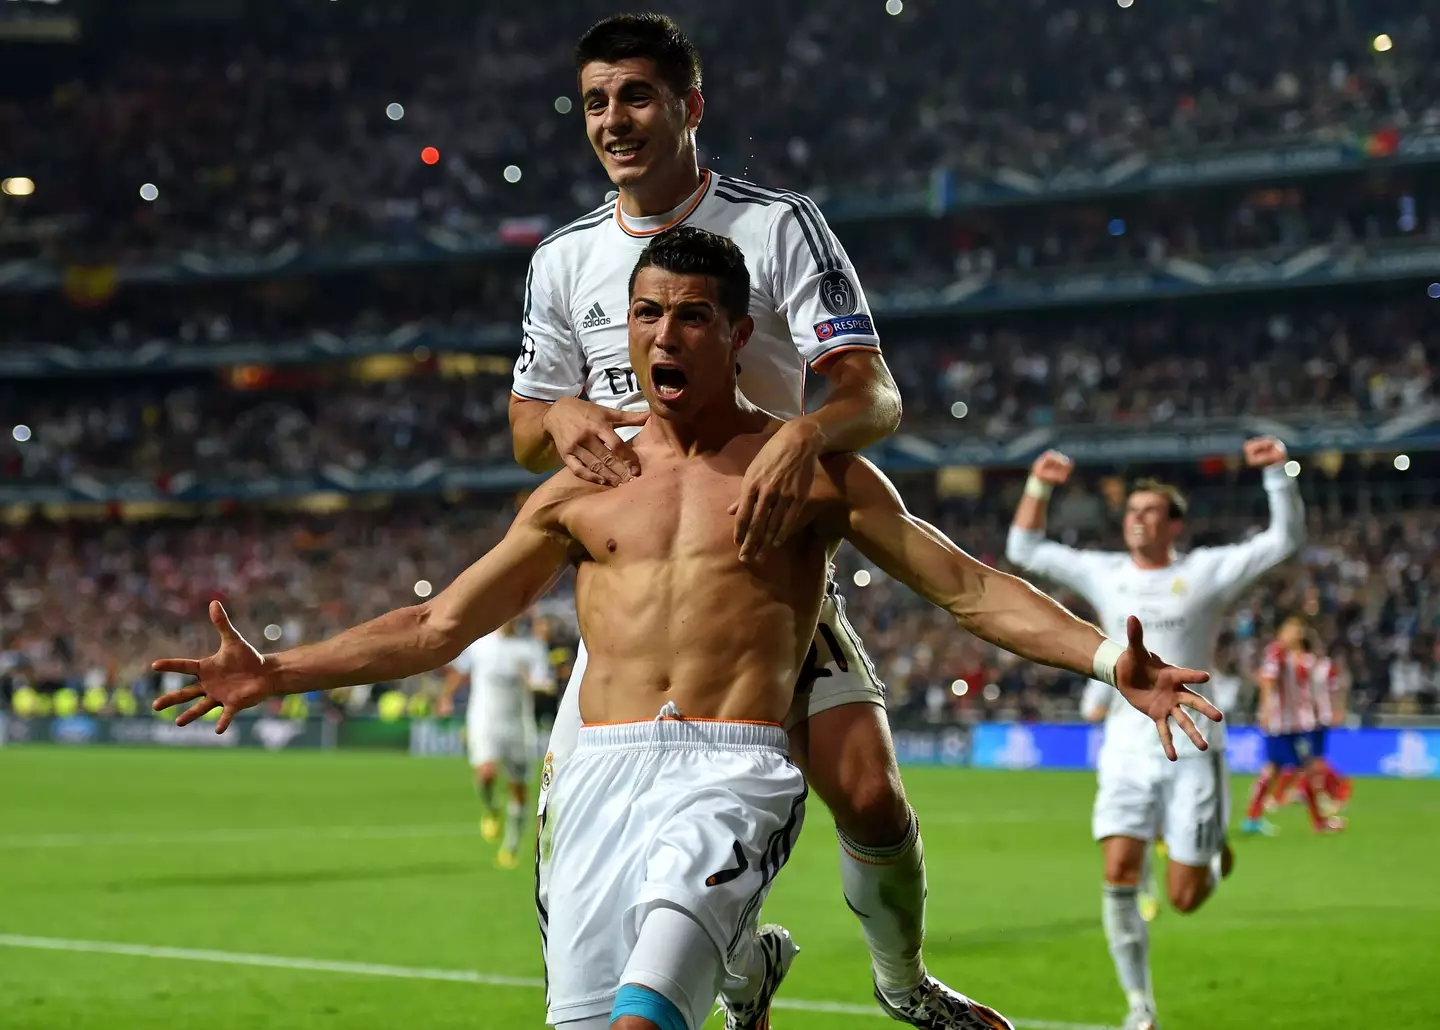 Ronaldo scored in the final in 2014. Image: PA Images